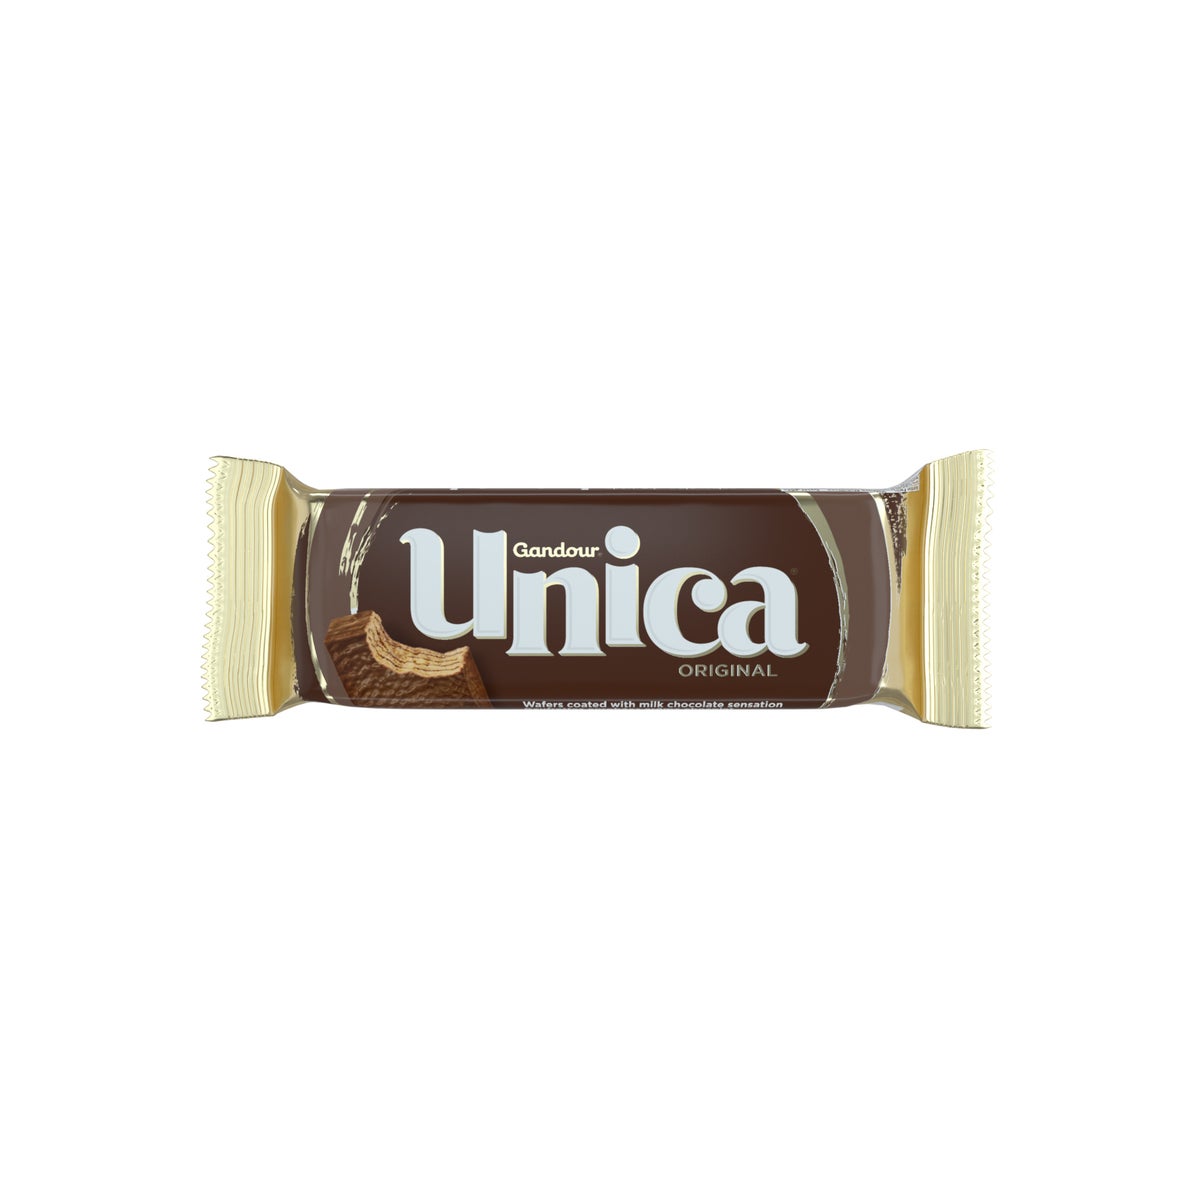 UNICA Wafers "Gandour" ( 24g 24 Cts.) x 14